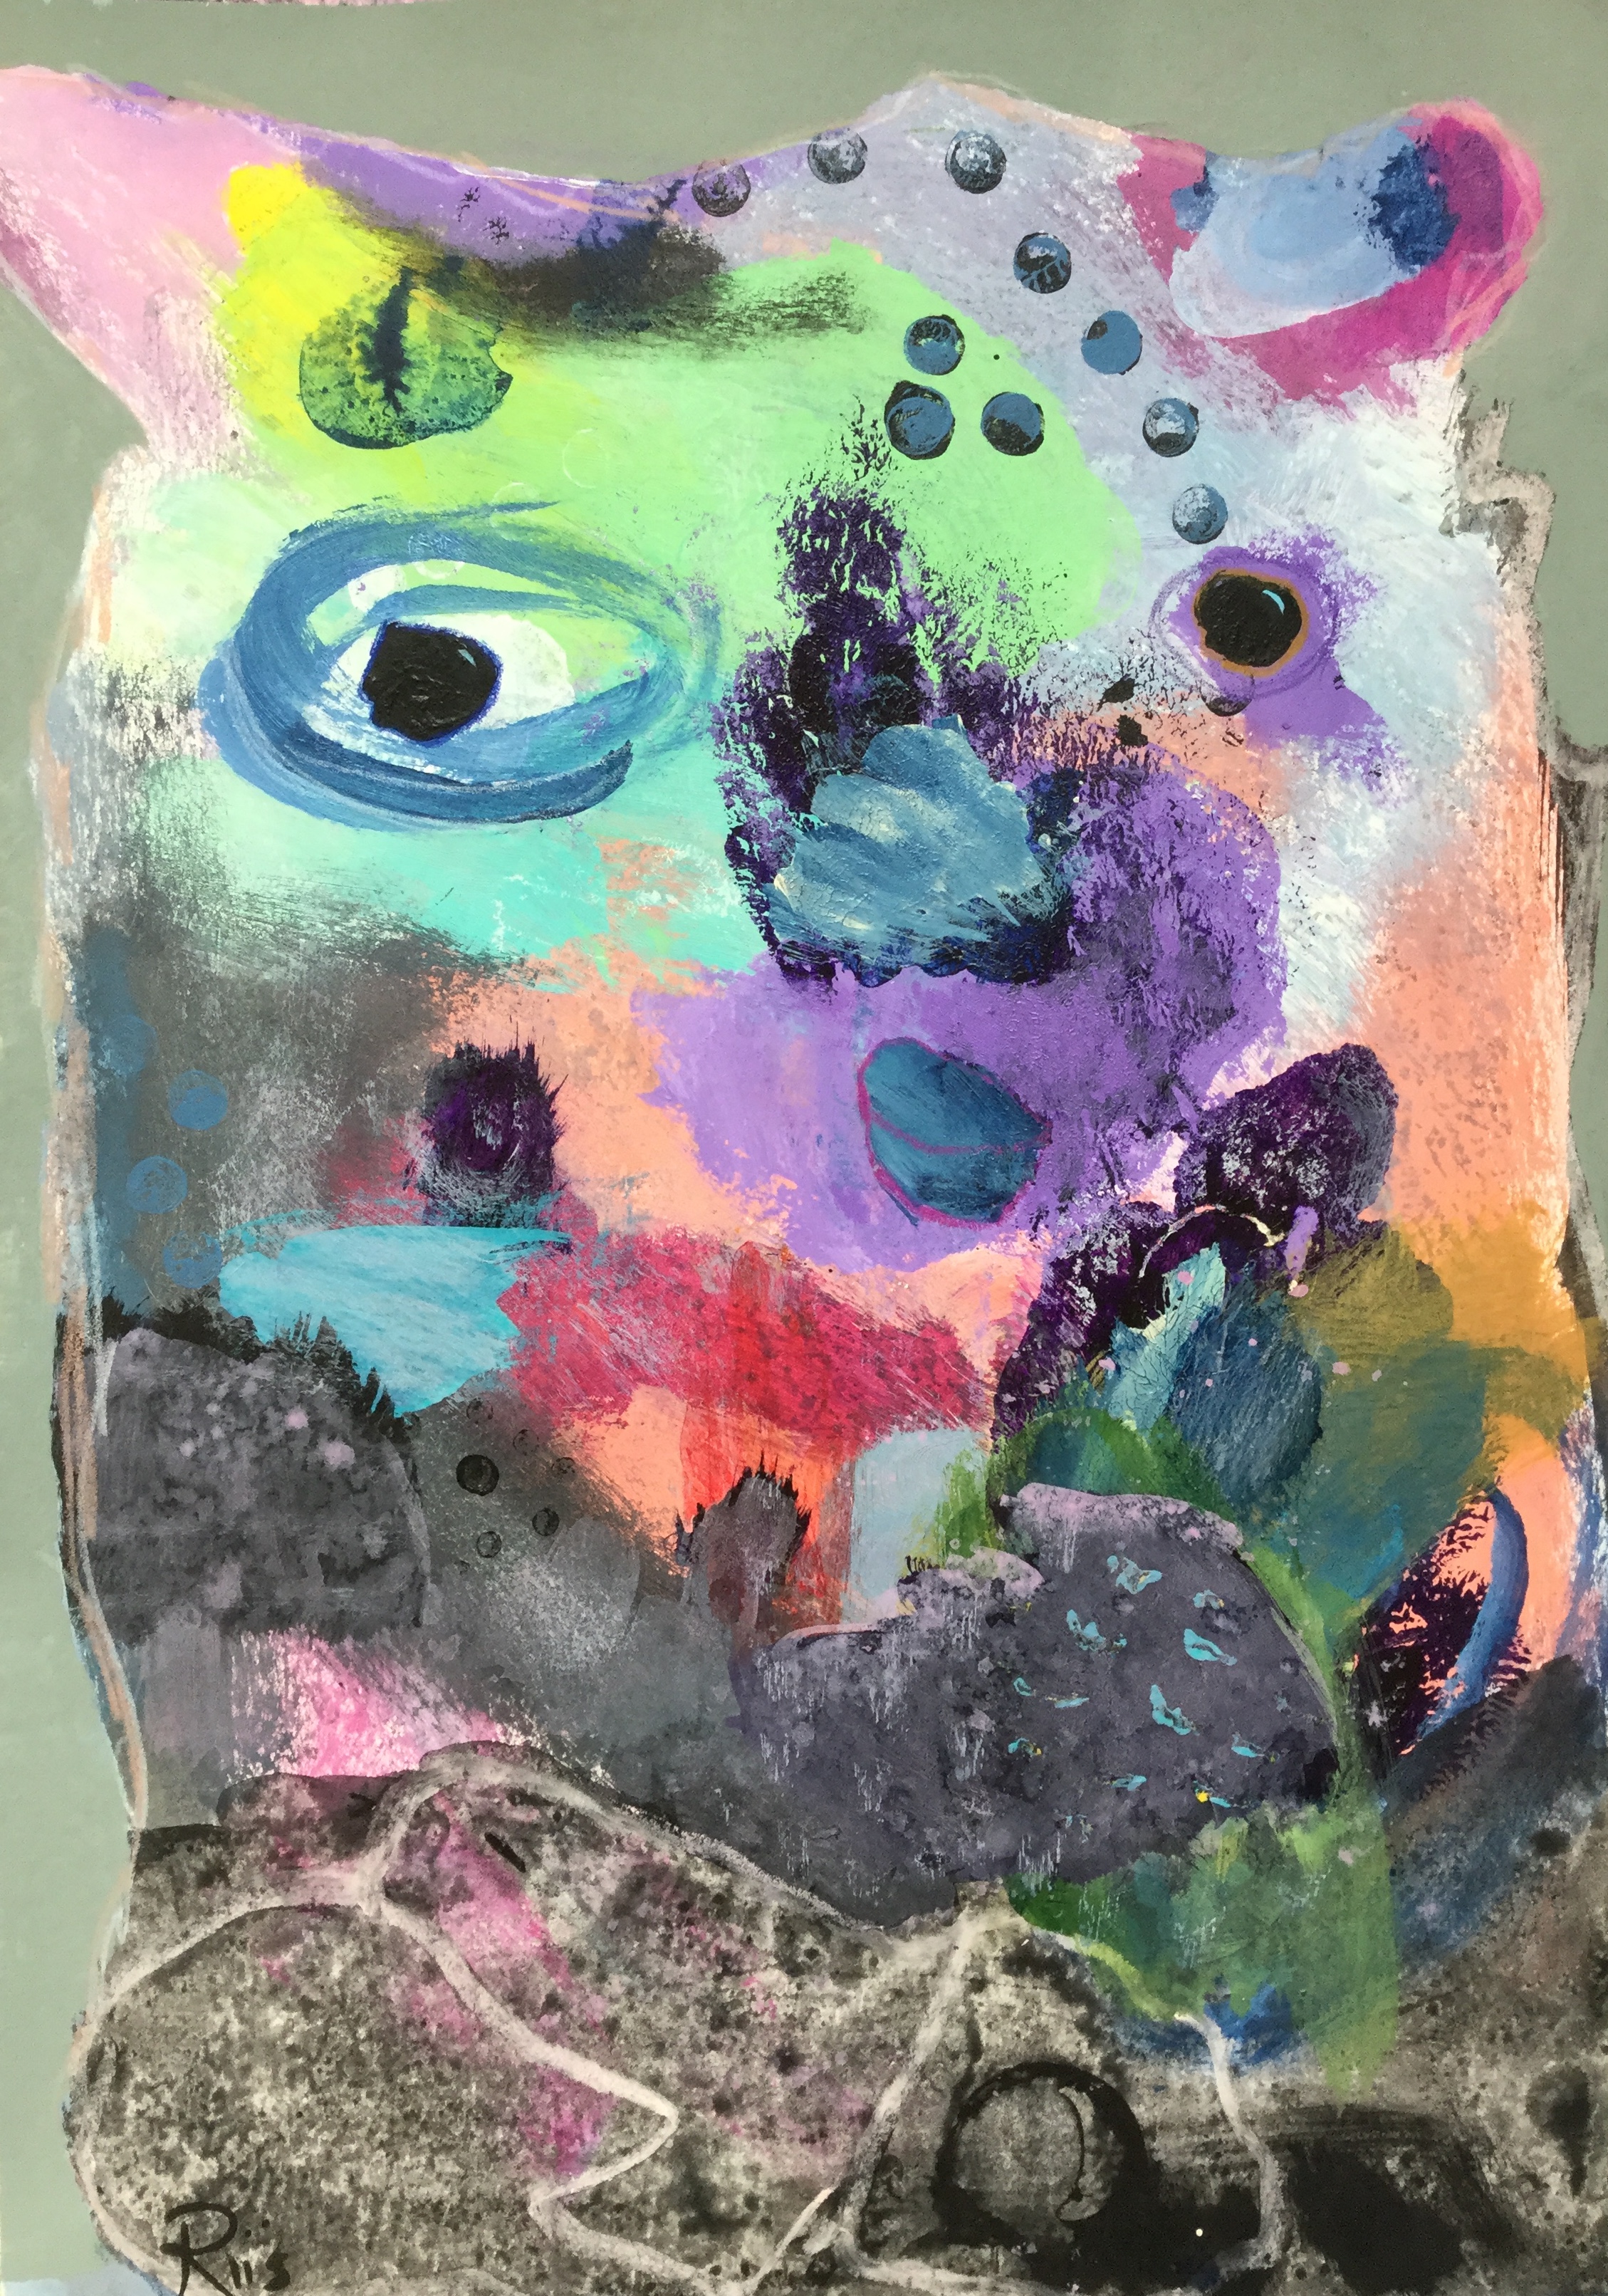 Mixed media outsider art painting of a very abstract multicolored animal resembling a koala.